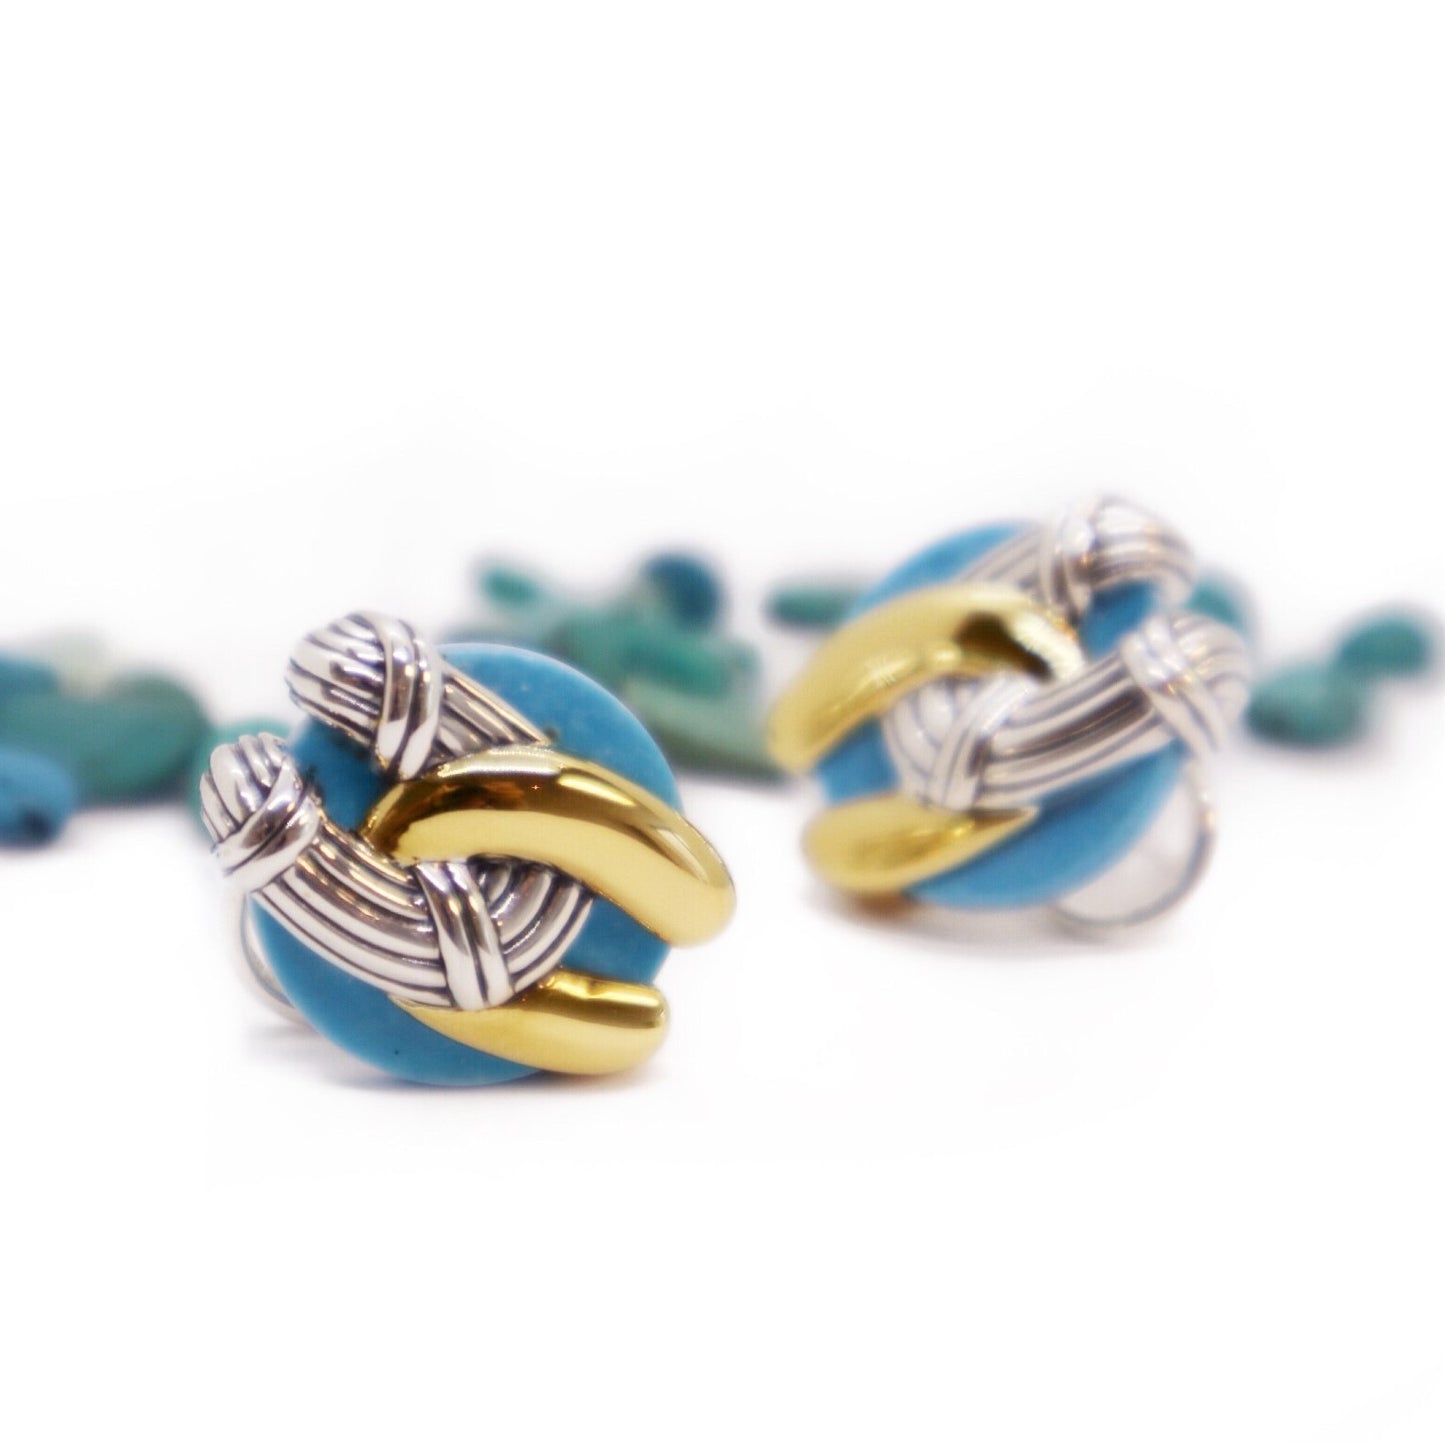 Southampton Disc Knot Earrings in two tone sterling silver with turquoise